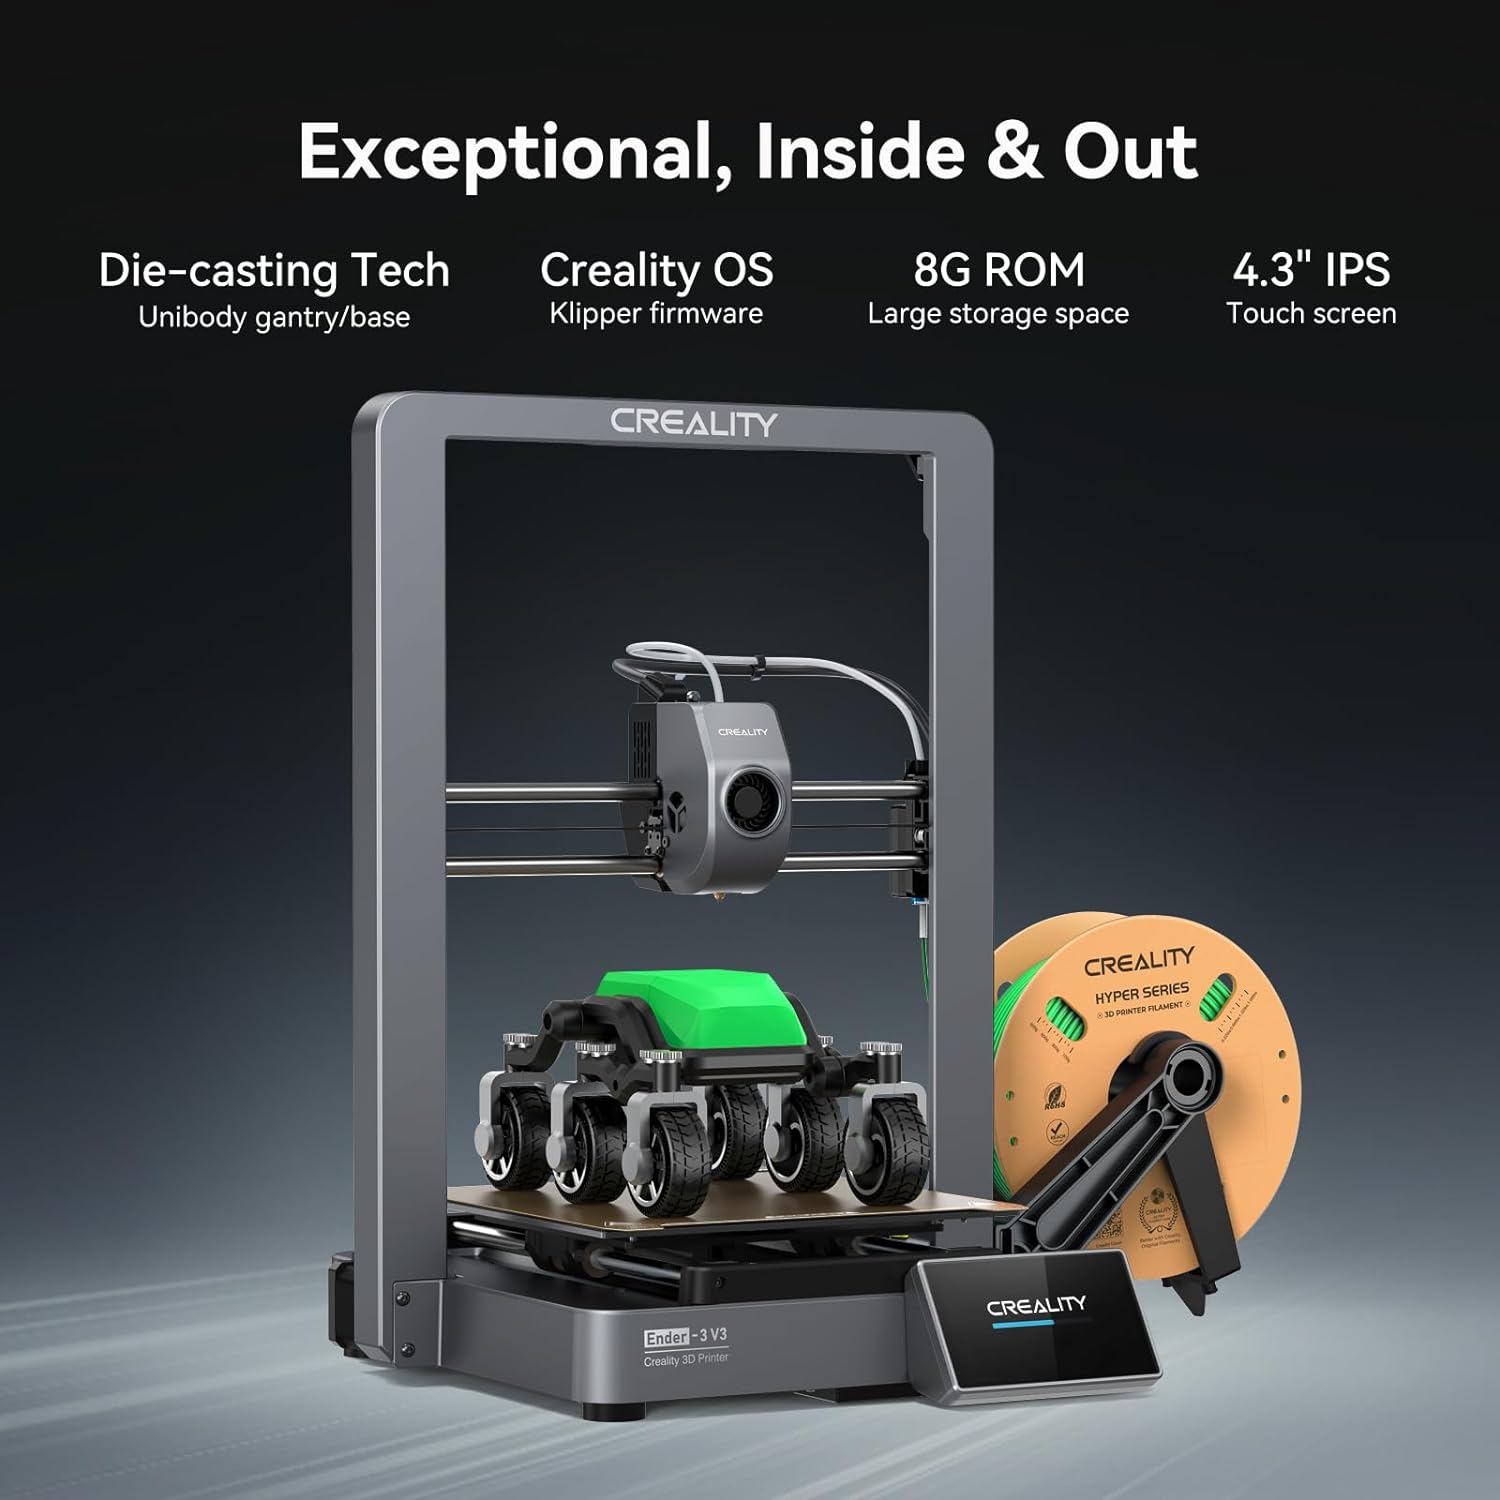 2023-creality-ender-3-v3-se-3d-printers-250mms-high-speed-printing-worry-free-auto-leveling-sprite-direct-extruder-dual-1-1 2023 Creality Ender-3 V3 SE 3D Printer Review